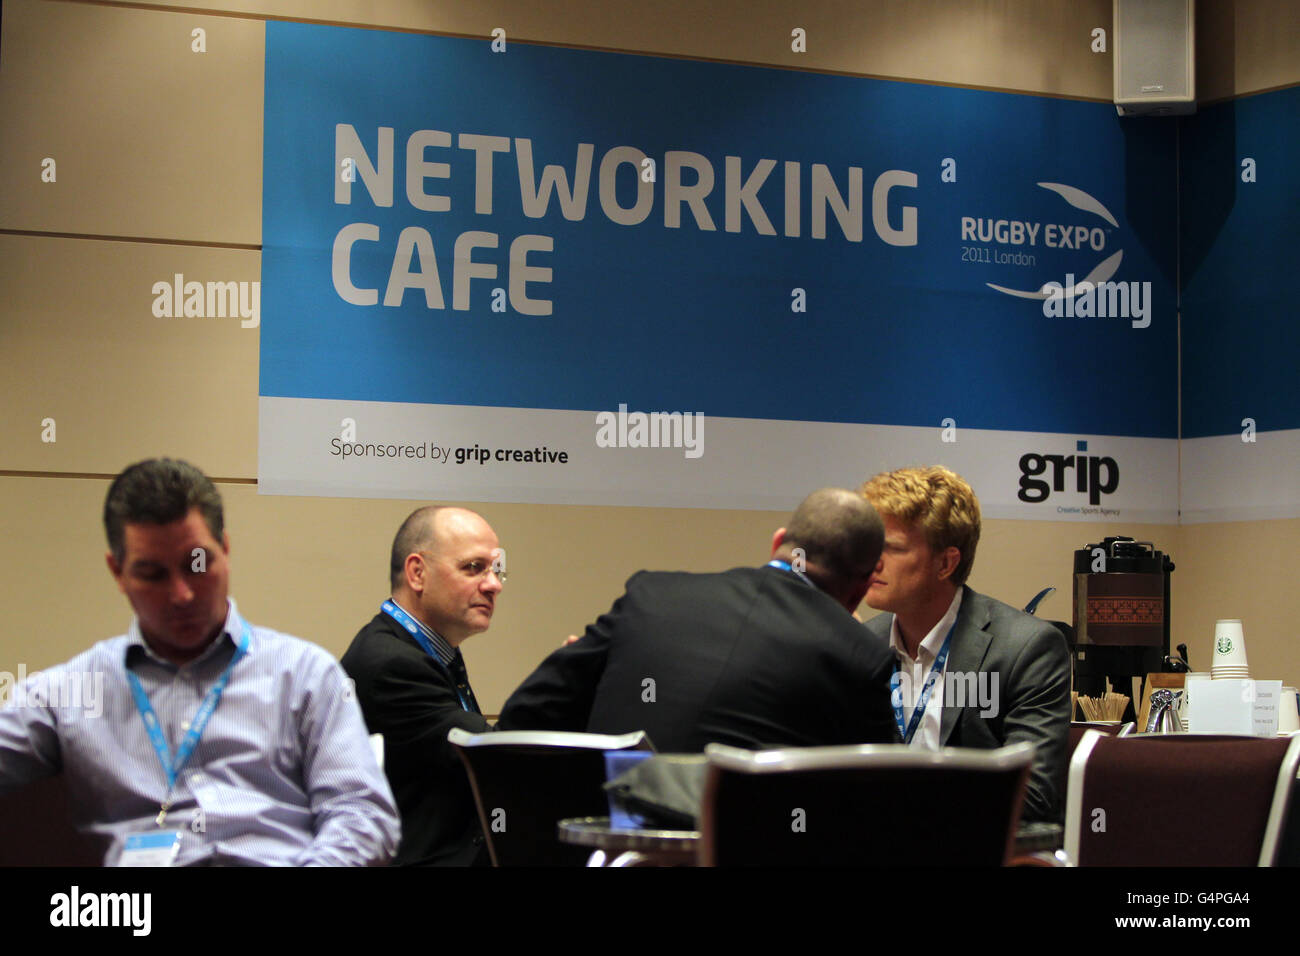 The Networking Cafe on Day One of the Rugby Expo 2011 Stock Photo